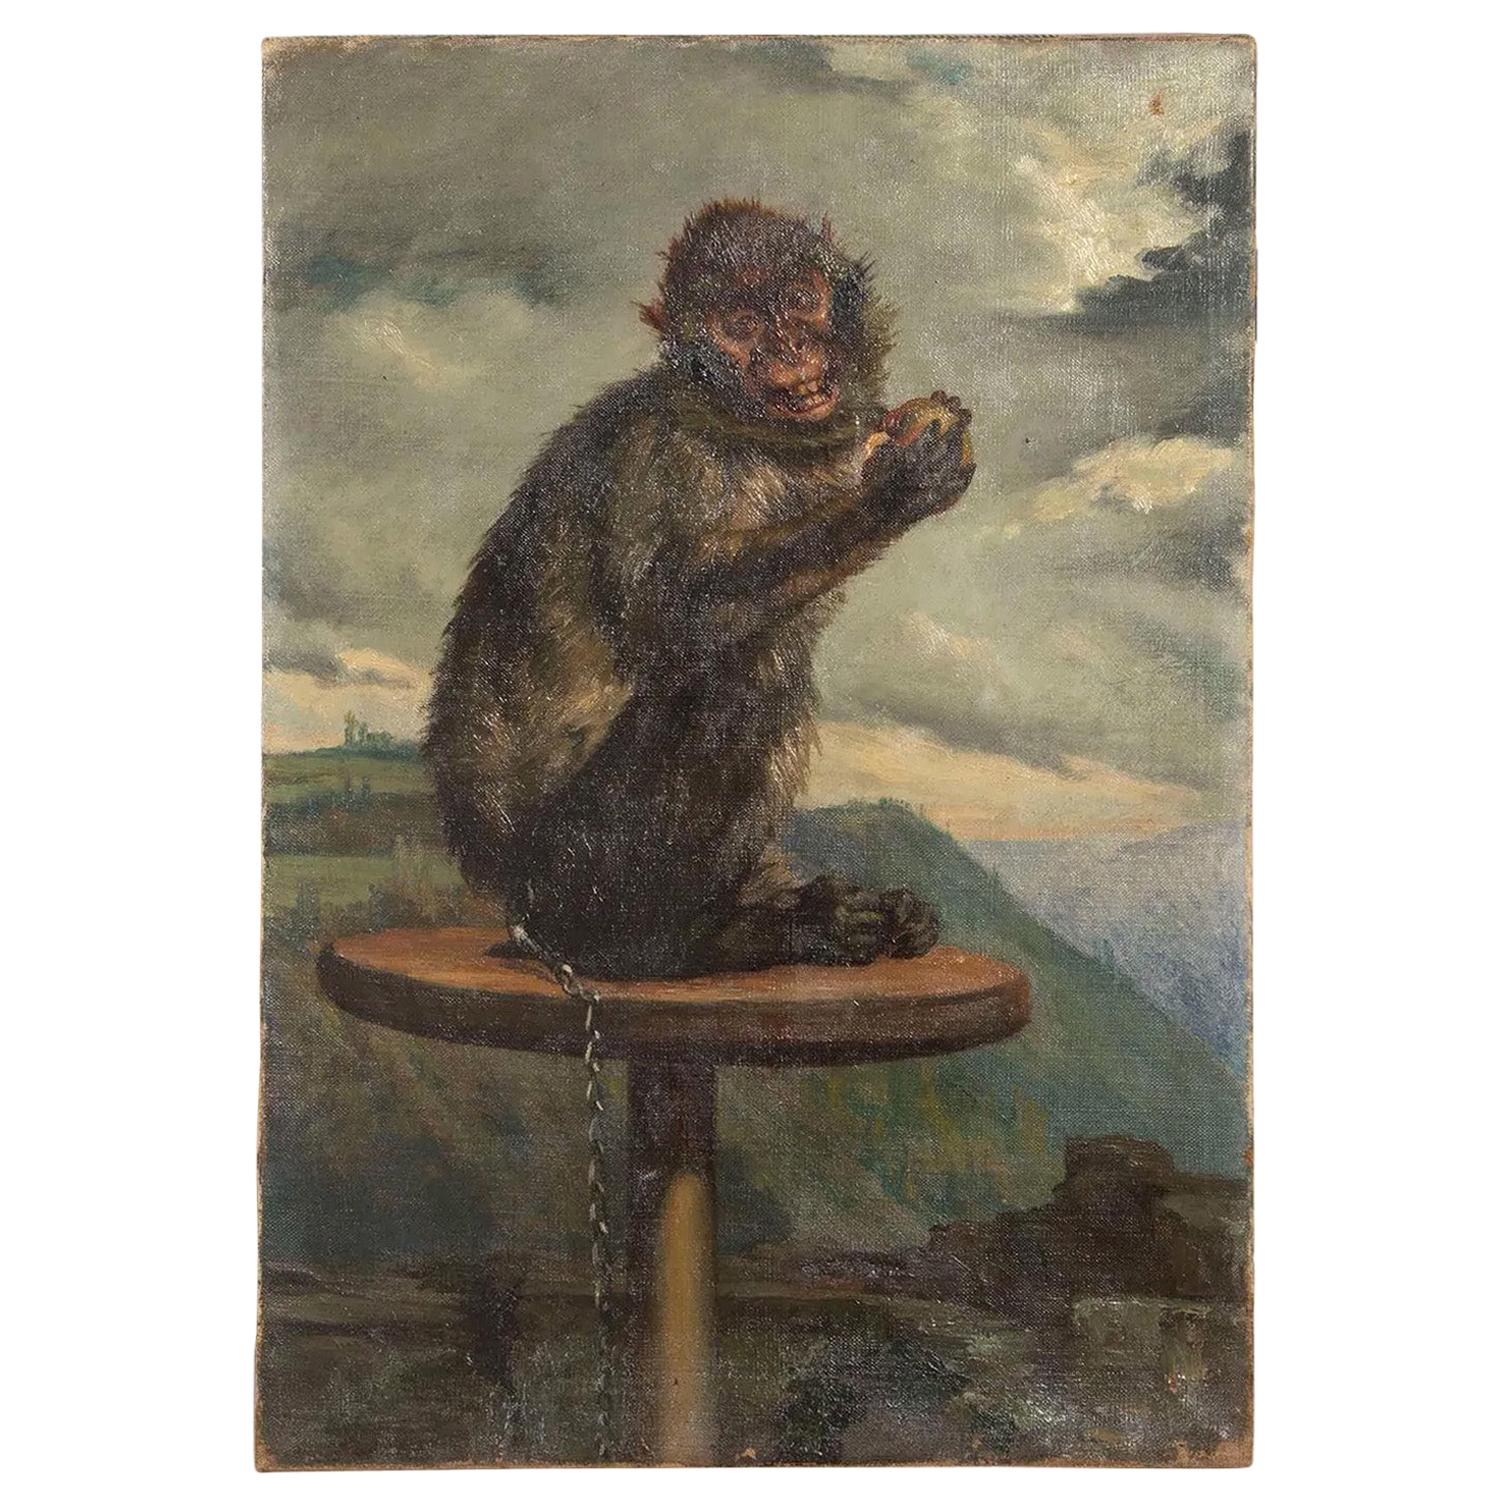 Oil on Panel Painting of a Monkey